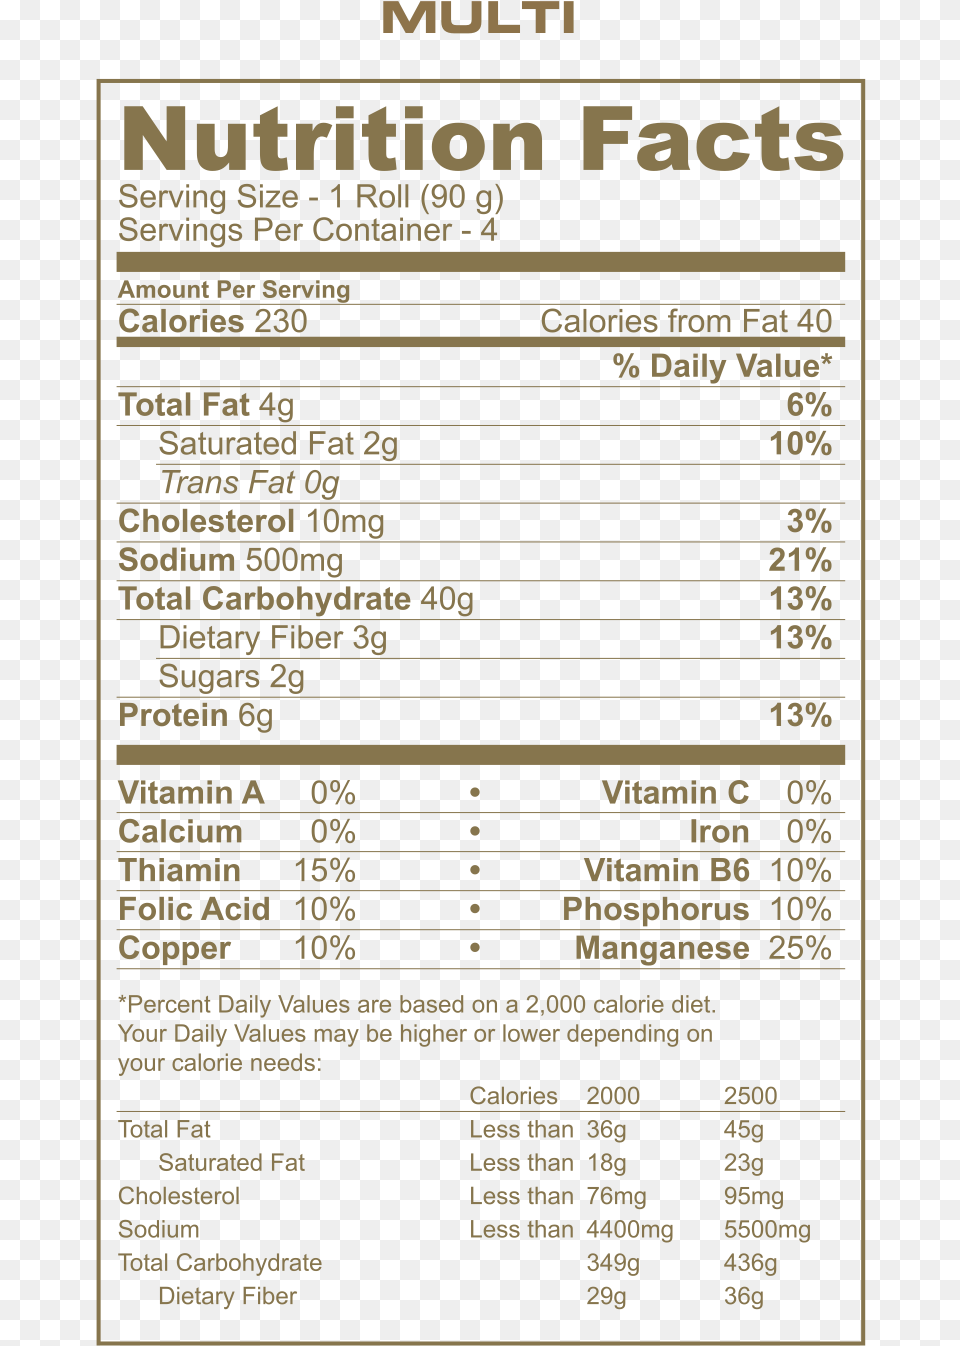 Nutrition Facts Eat The Ball Multi Pizza Hut Pepperoni Pizza Nutrition Facts, Menu, Text Png Image